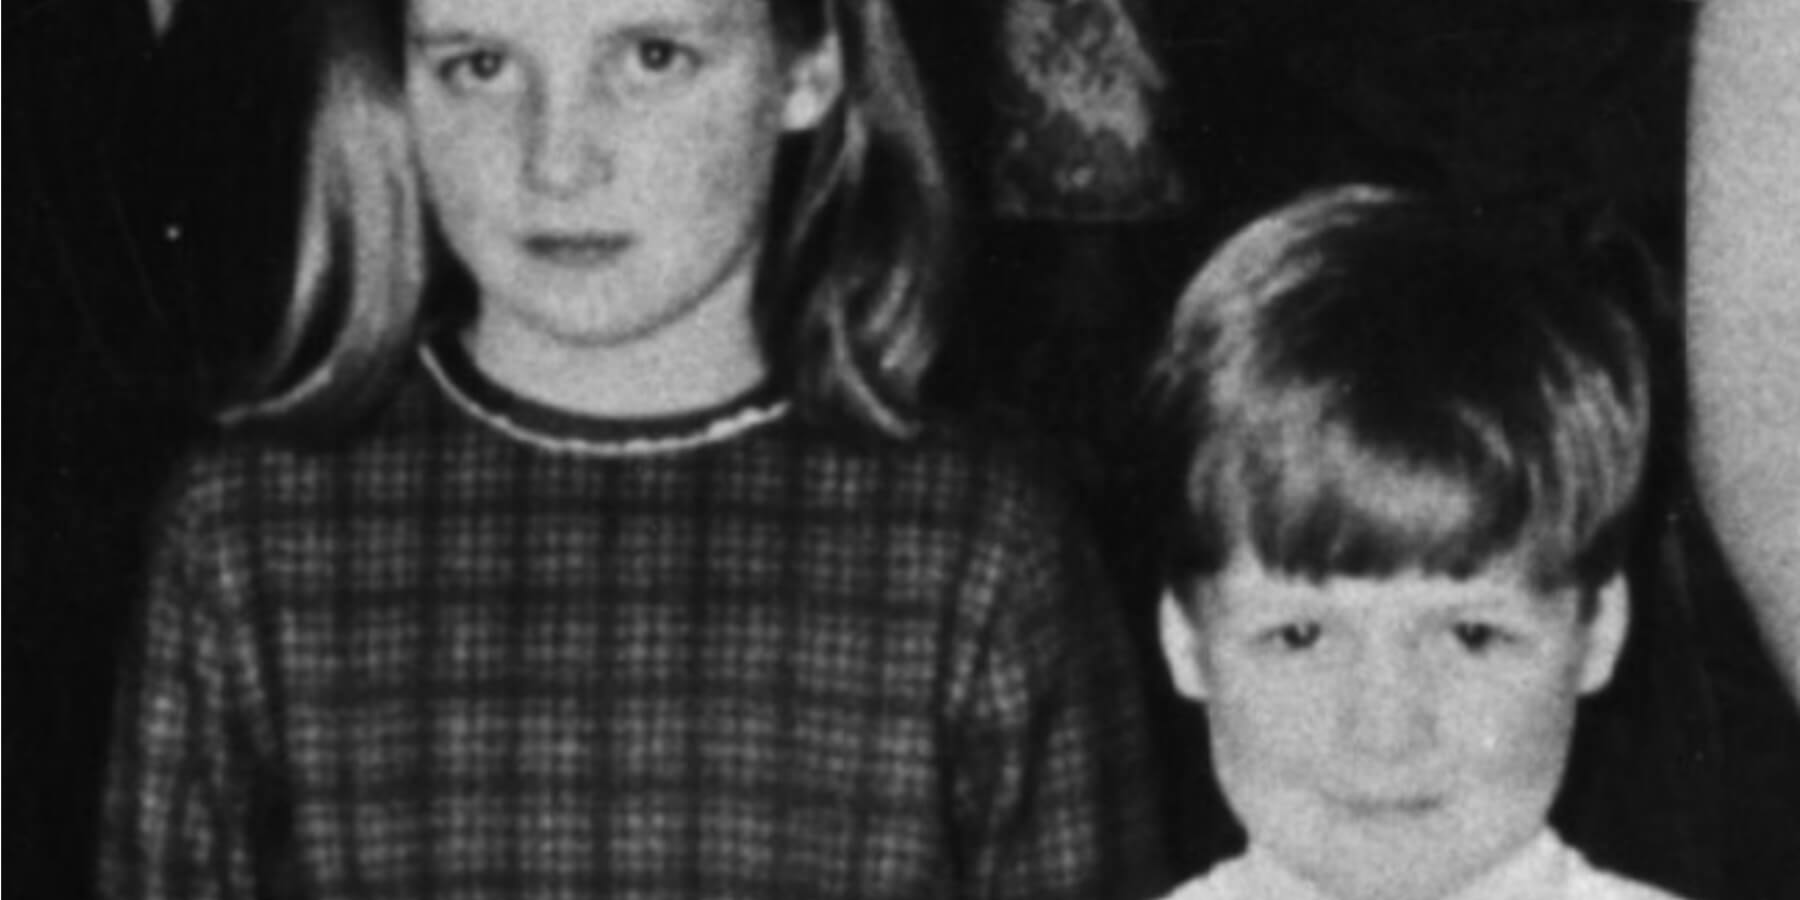 Princess Diana and her brother Charles Spencer, in 1969.